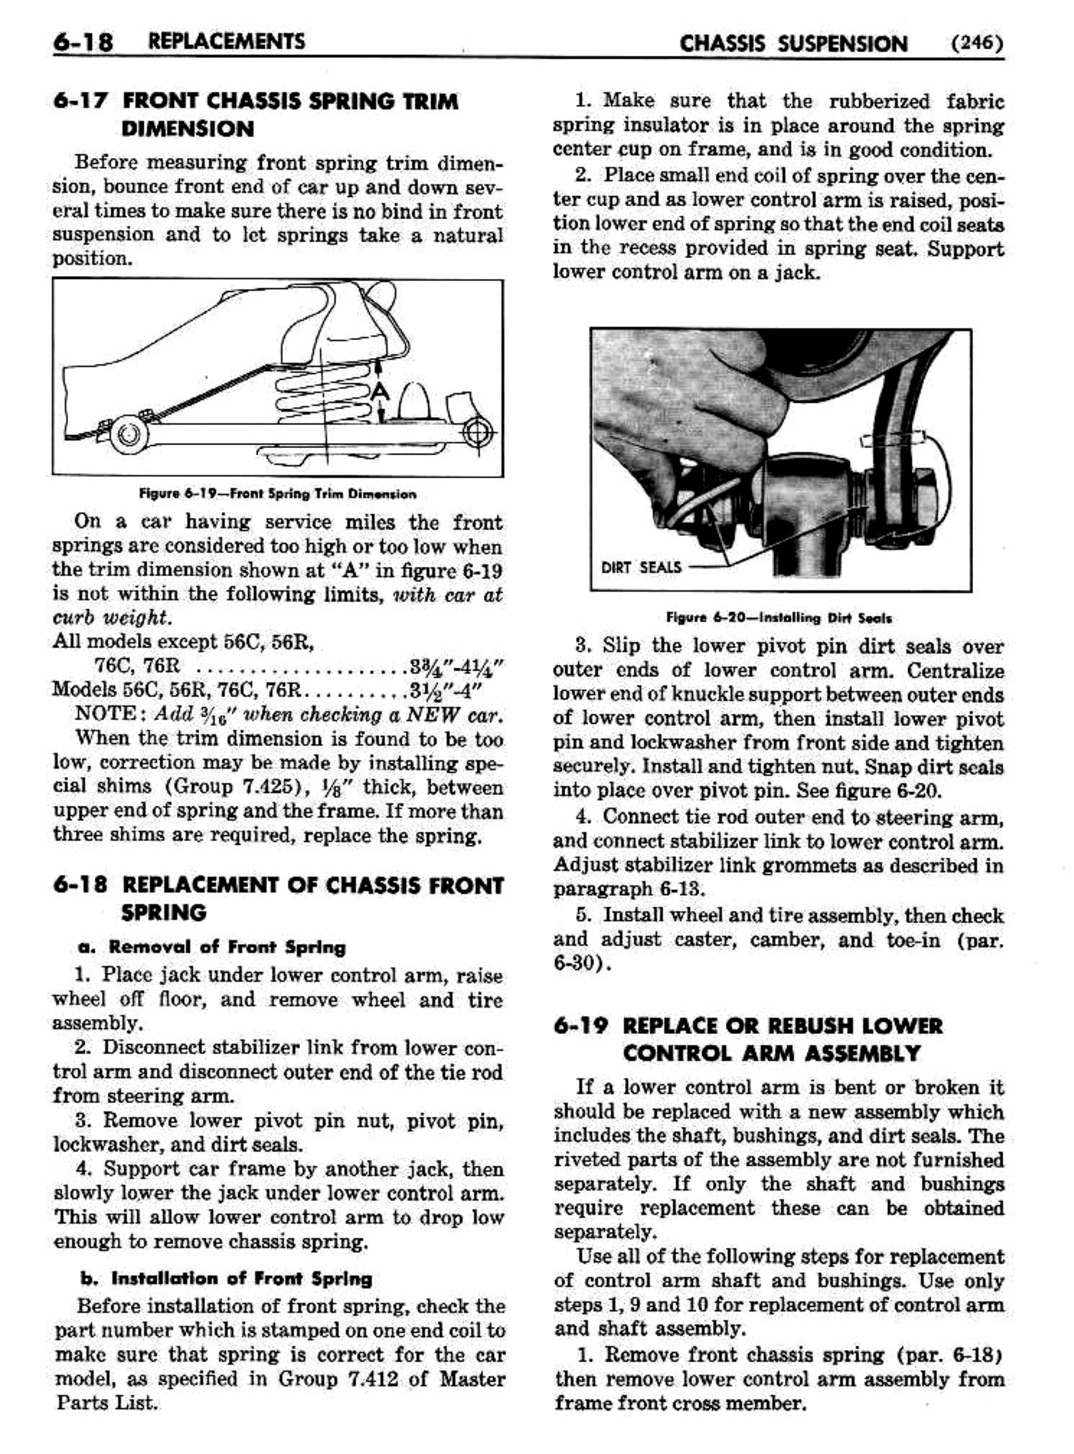 n_07 1951 Buick Shop Manual - Chassis Suspension-018-018.jpg